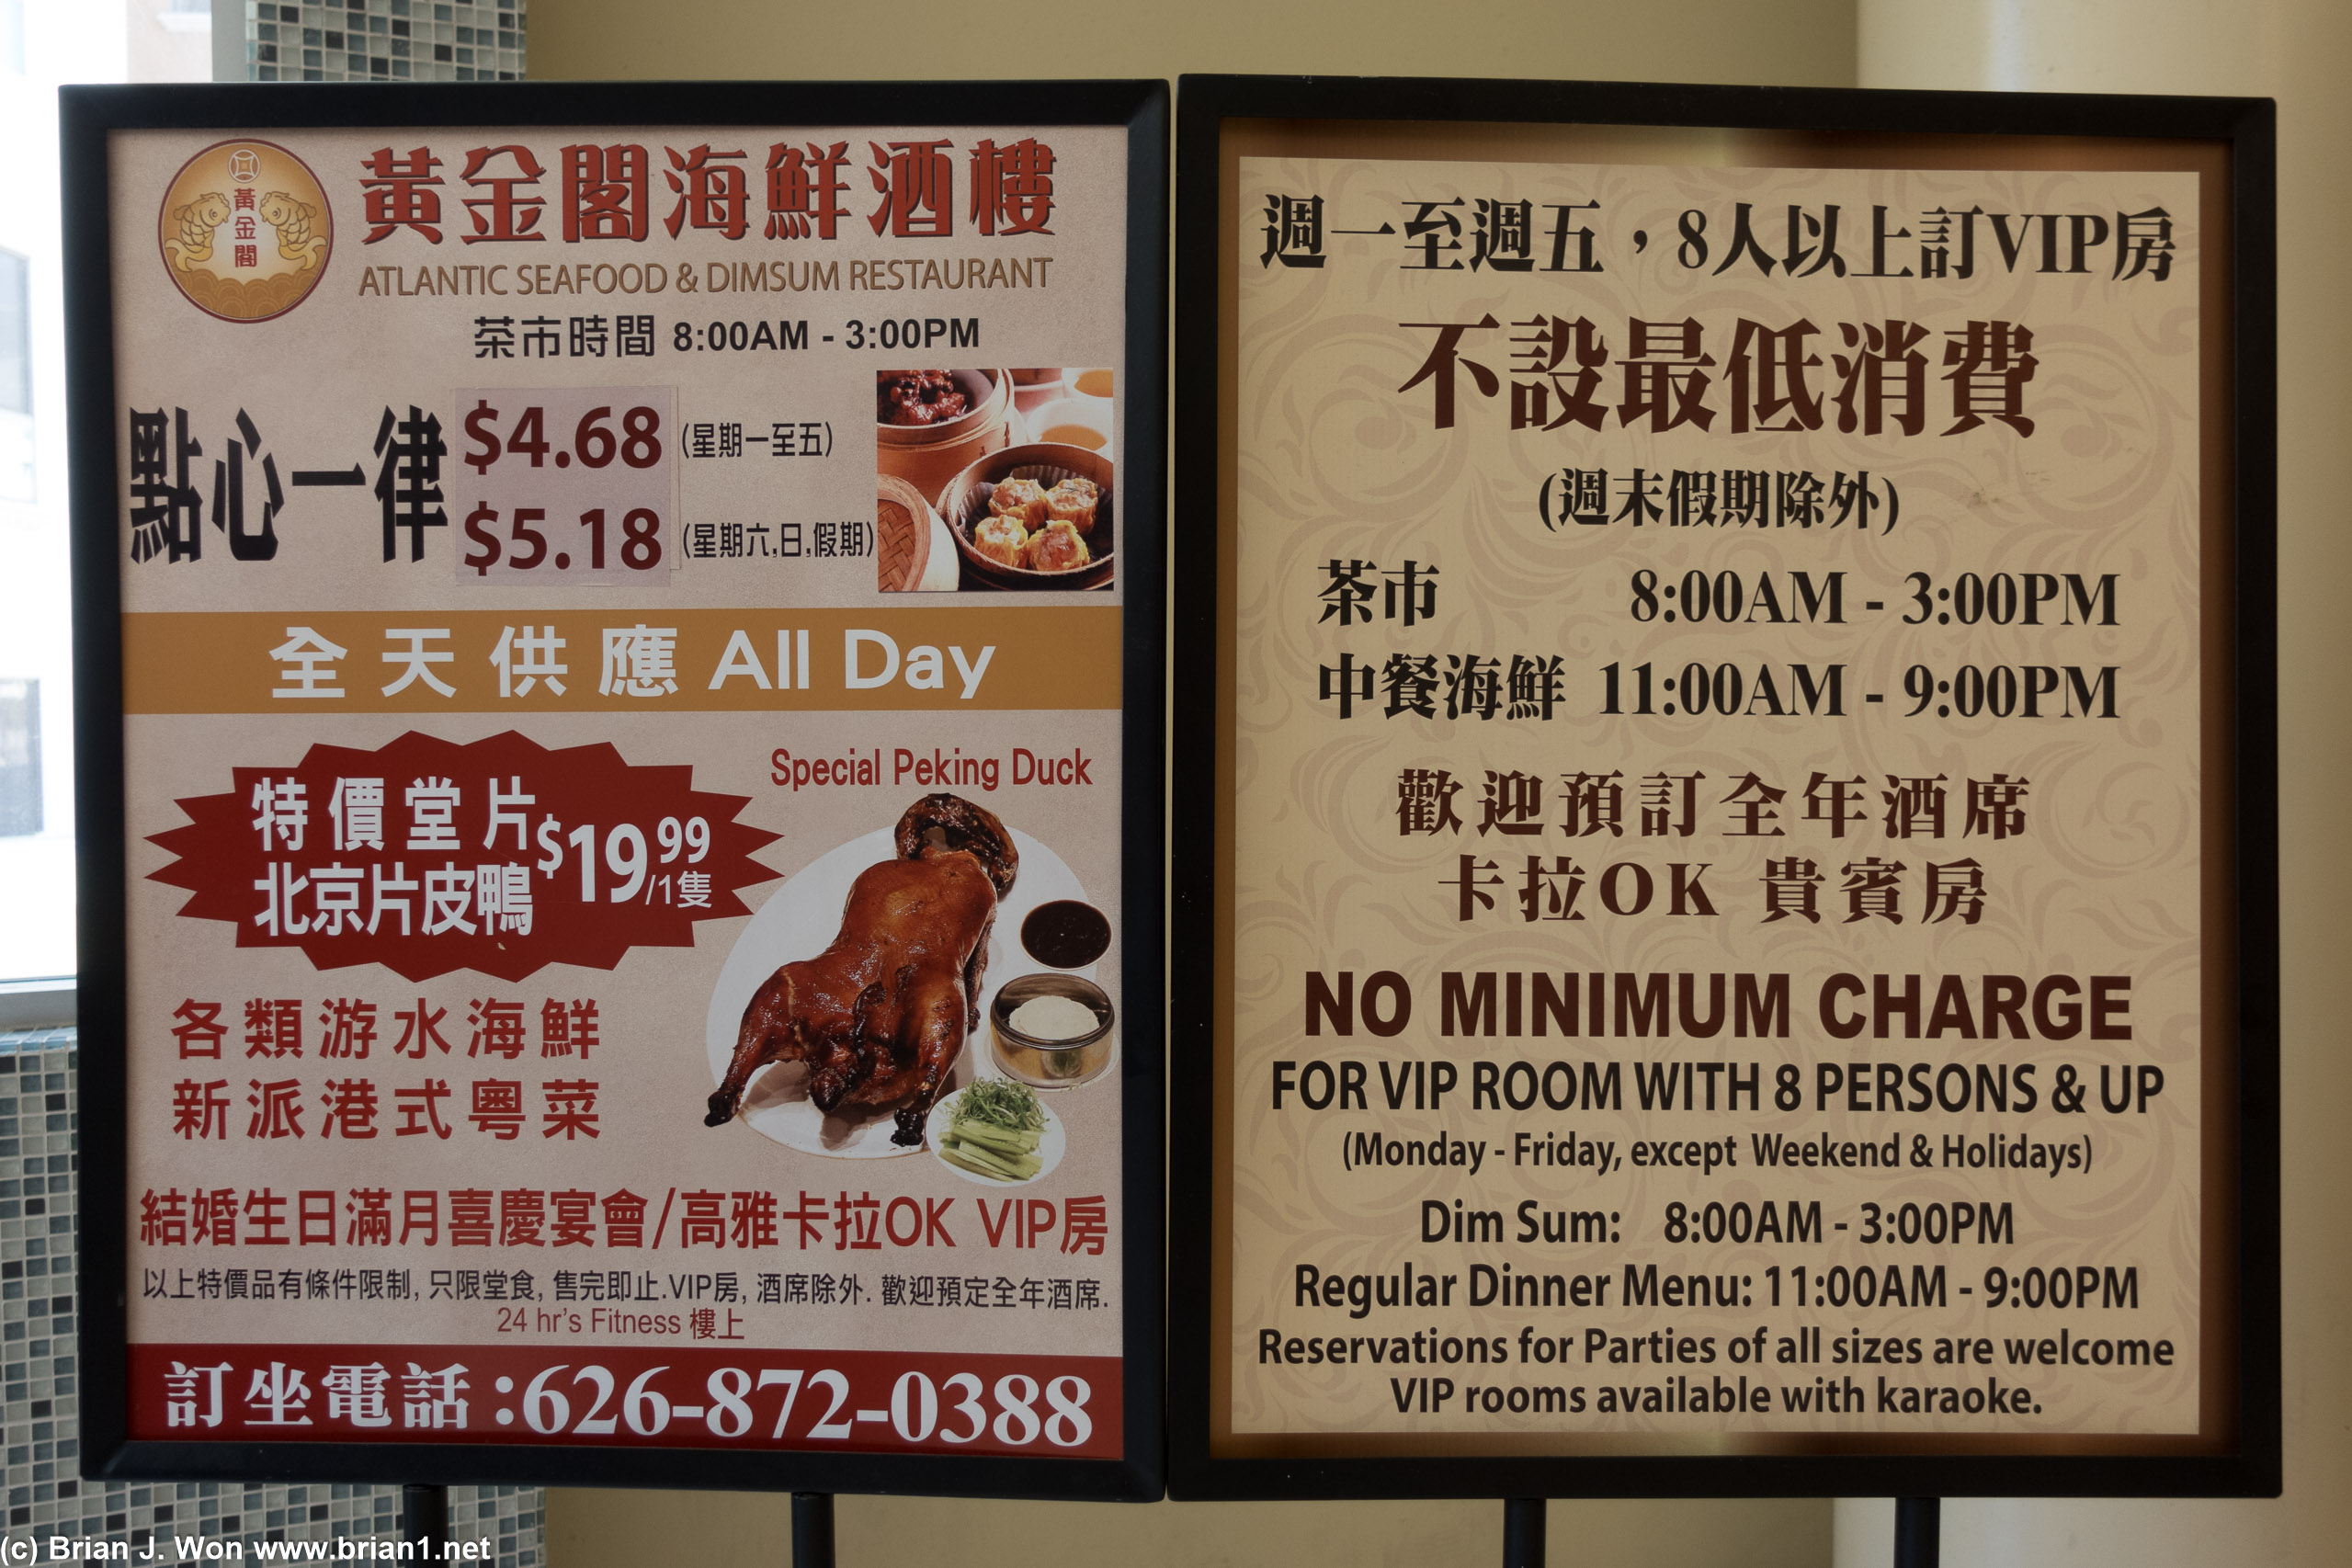 Atlantic Seafood and Dim Sum weekday is pretty cheap.